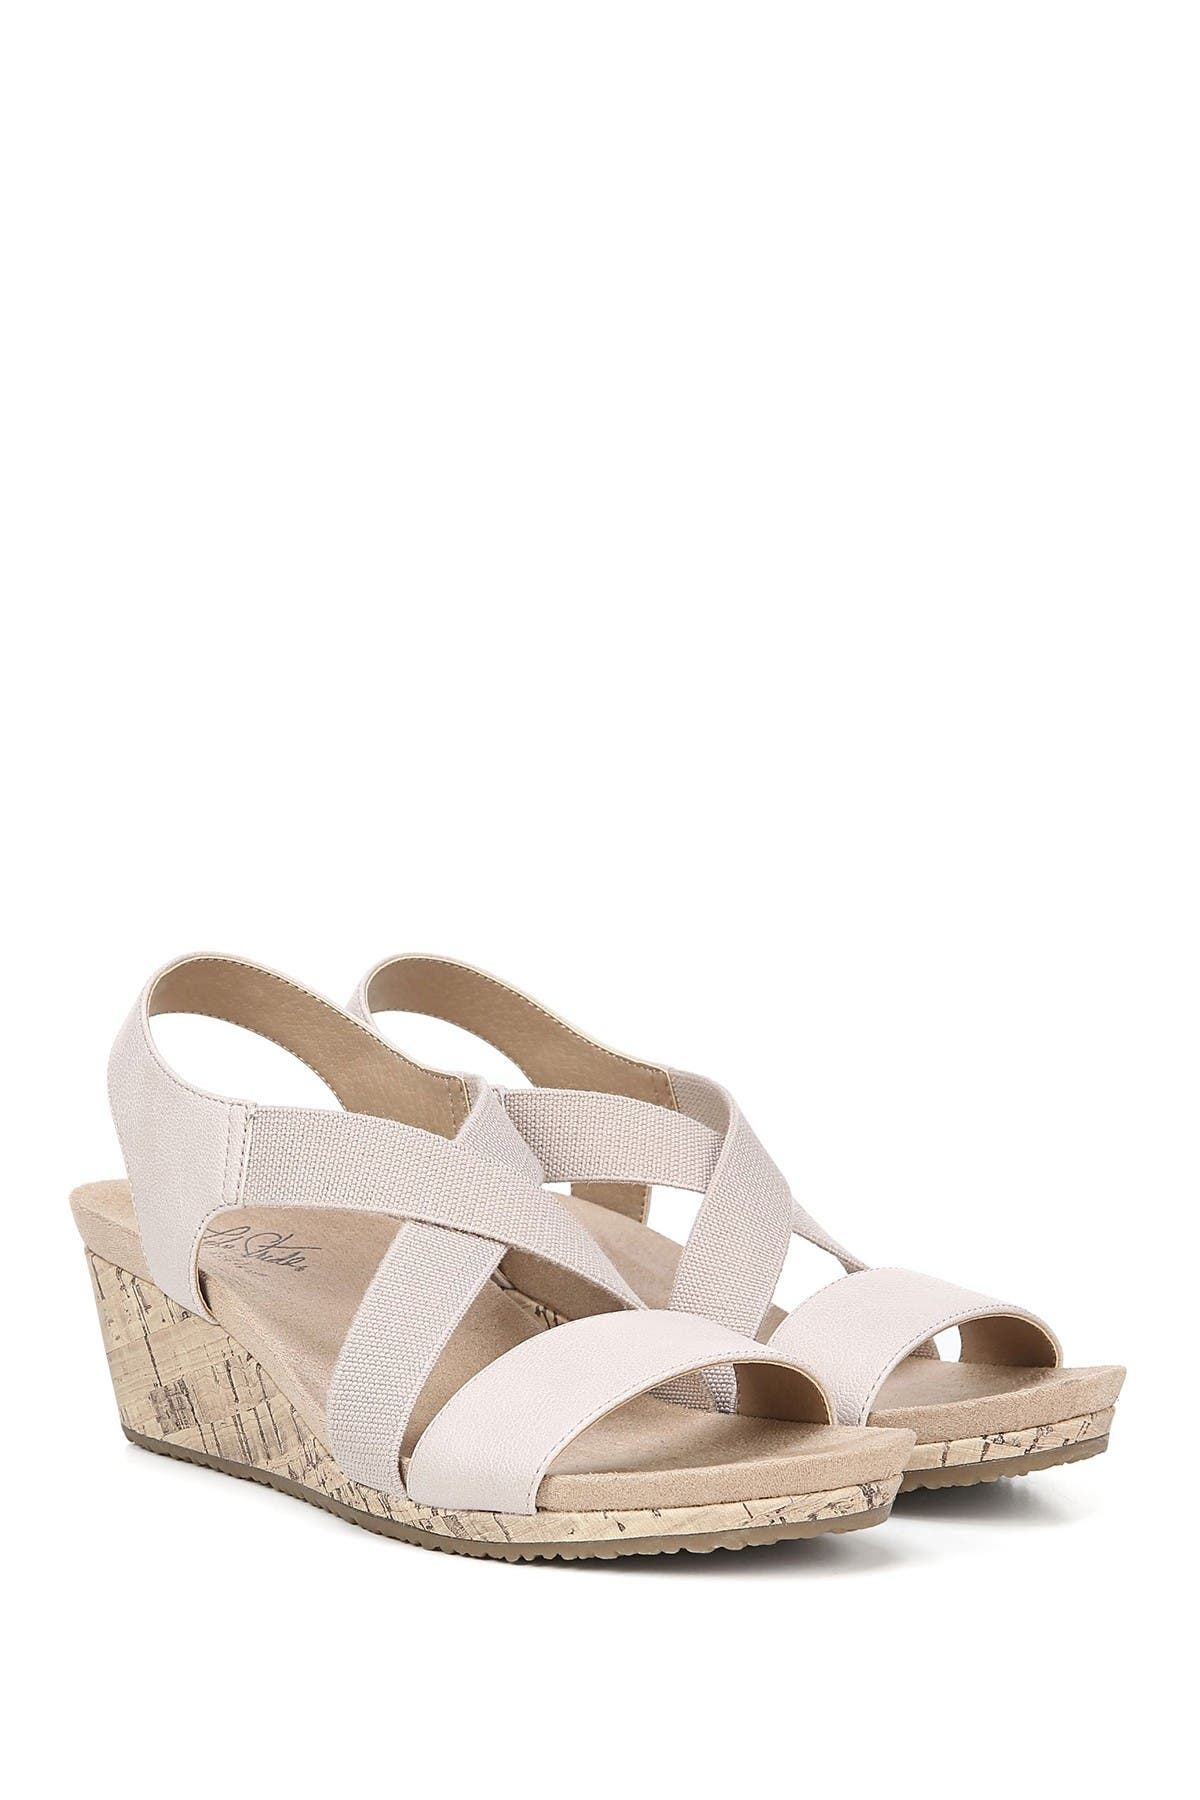 LifeStride | Mexico Wedge Sandal - Wide Width Available | Nordstrom Rack